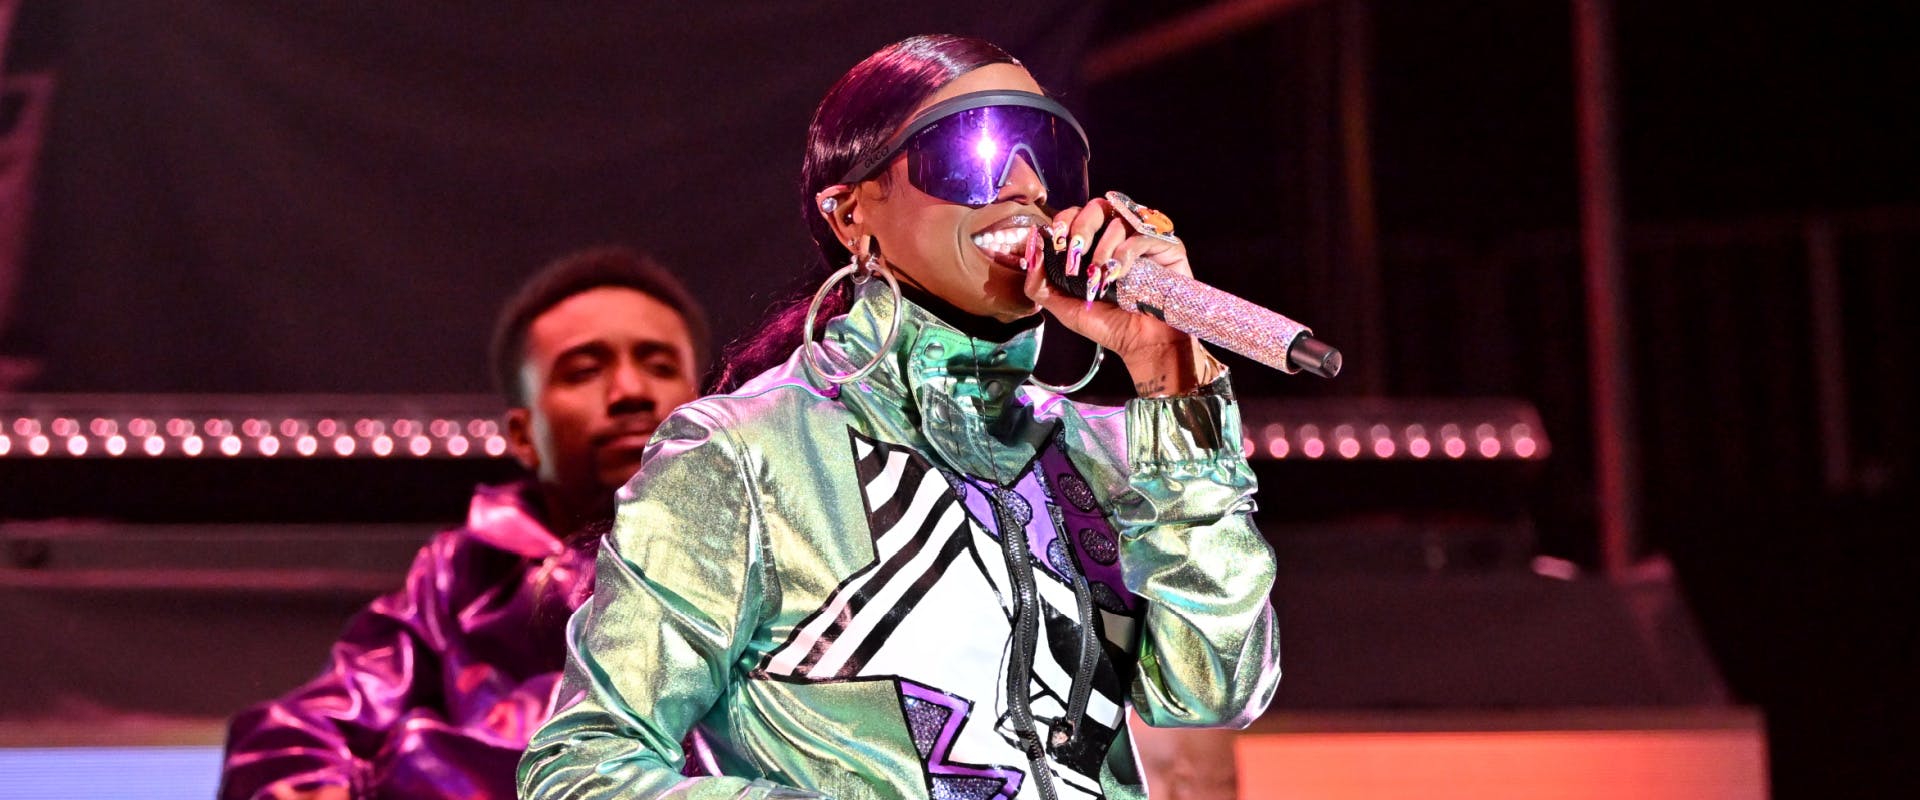 ATLANTA, GEORGIA - MAY 12: Missy Elliott performs onstage during the Strength of a Woman's MJB “Celebrating Hip Hop 50” Concert in Partnership with Mary J. Blige, Pepsi, and Live Nation Urban at State Farm Arena on May 12, 2023 in Atlanta, Georgia. (Photo by Paras Griffin/Getty Images for Strength Of A Woman Festival & Summit)